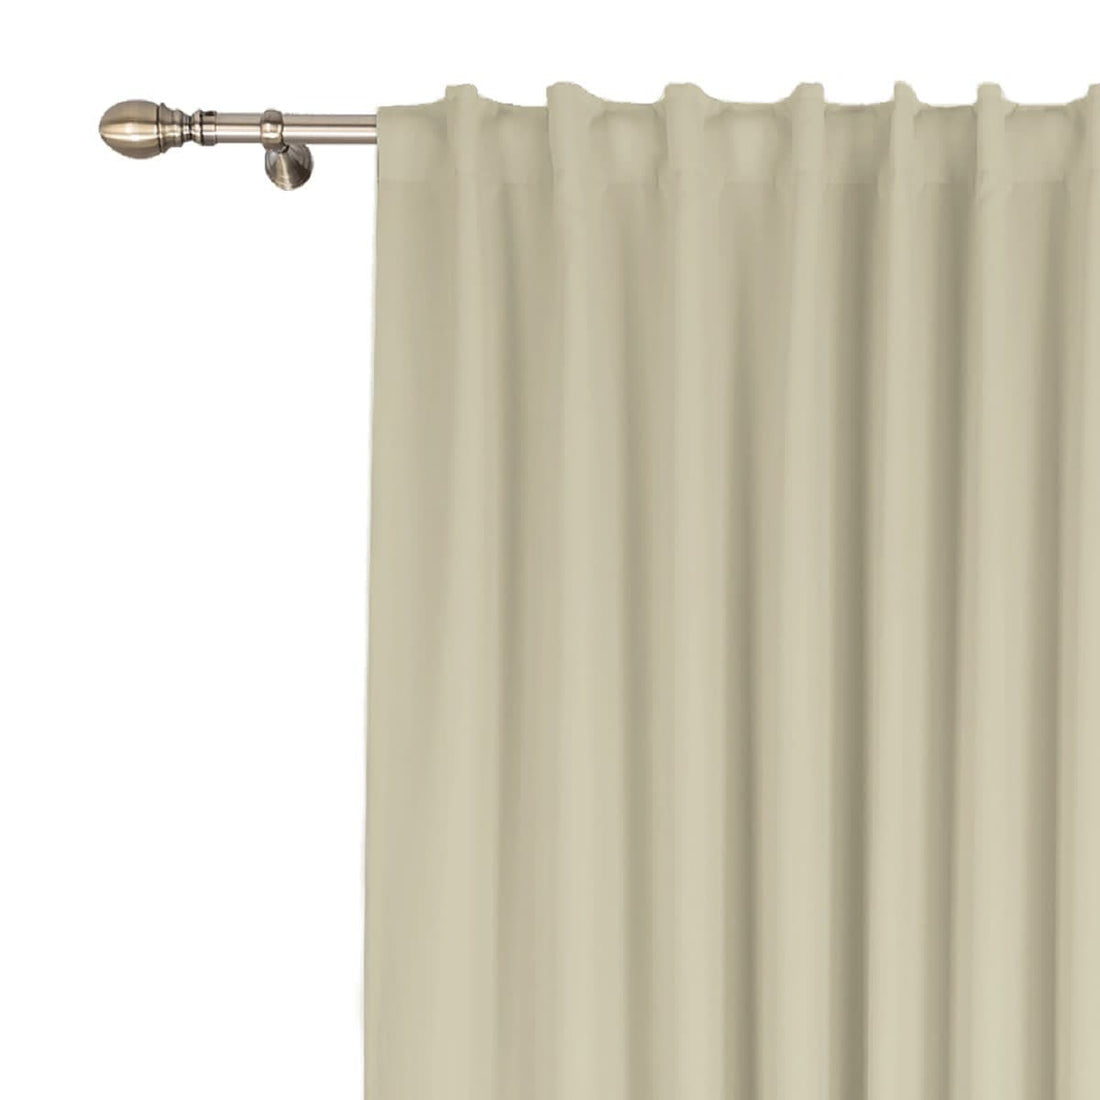 BEIGE OPAQUE CAROL CURTAIN 200X280 CM WEBBING AND CONCEALED HANGING LOOP - best price from Maltashopper.com BR480009481